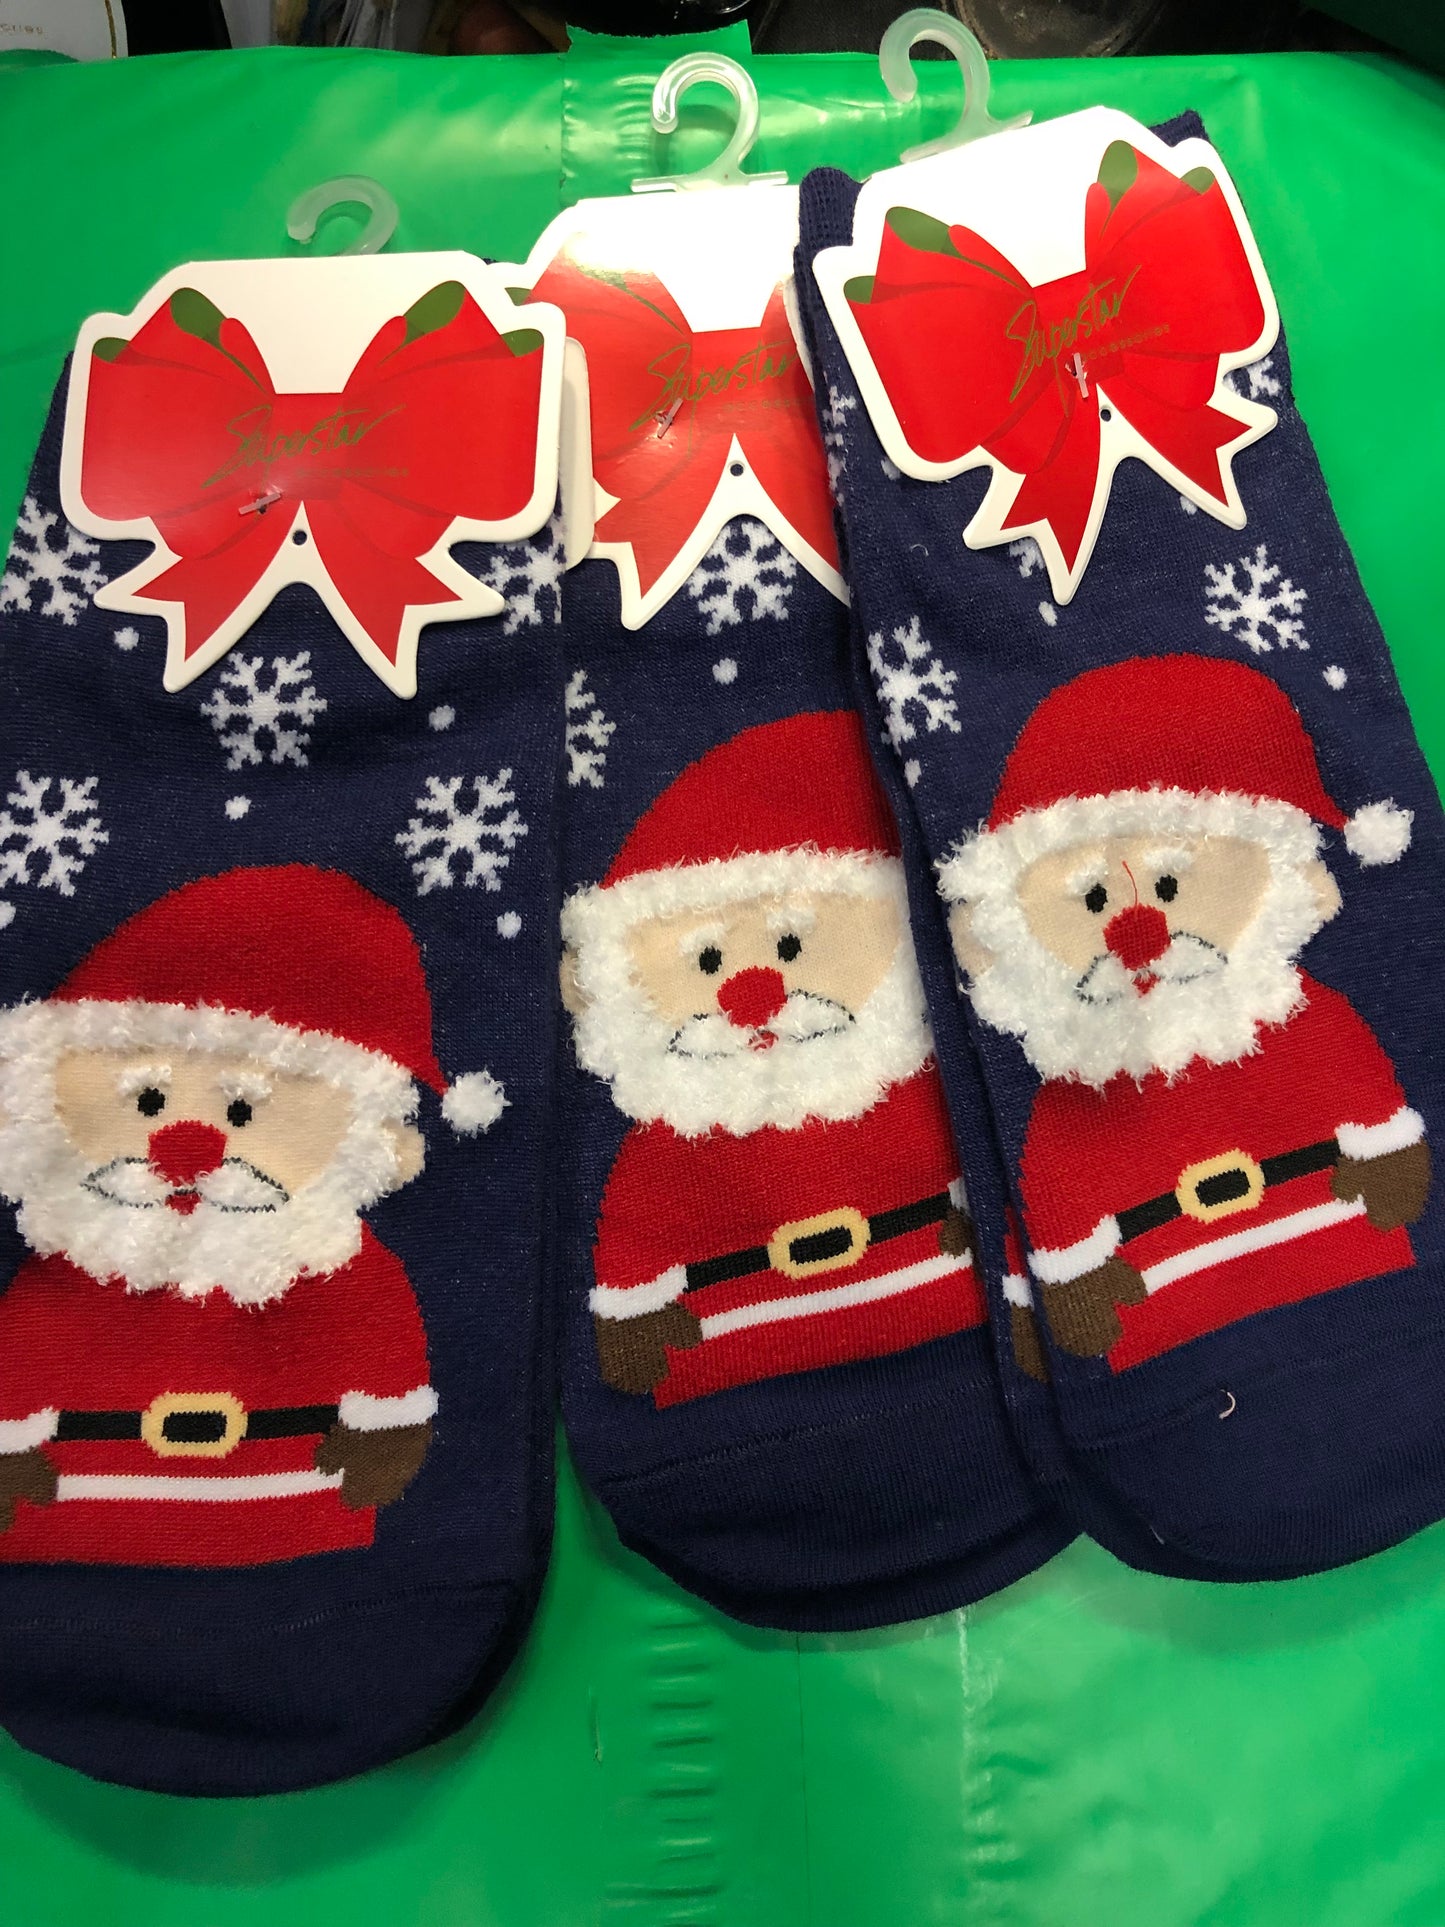 Woman Christmas  Ankle Socks "New Arrival" Great Stocking Stuffers $3 each Or 2 For $5.00